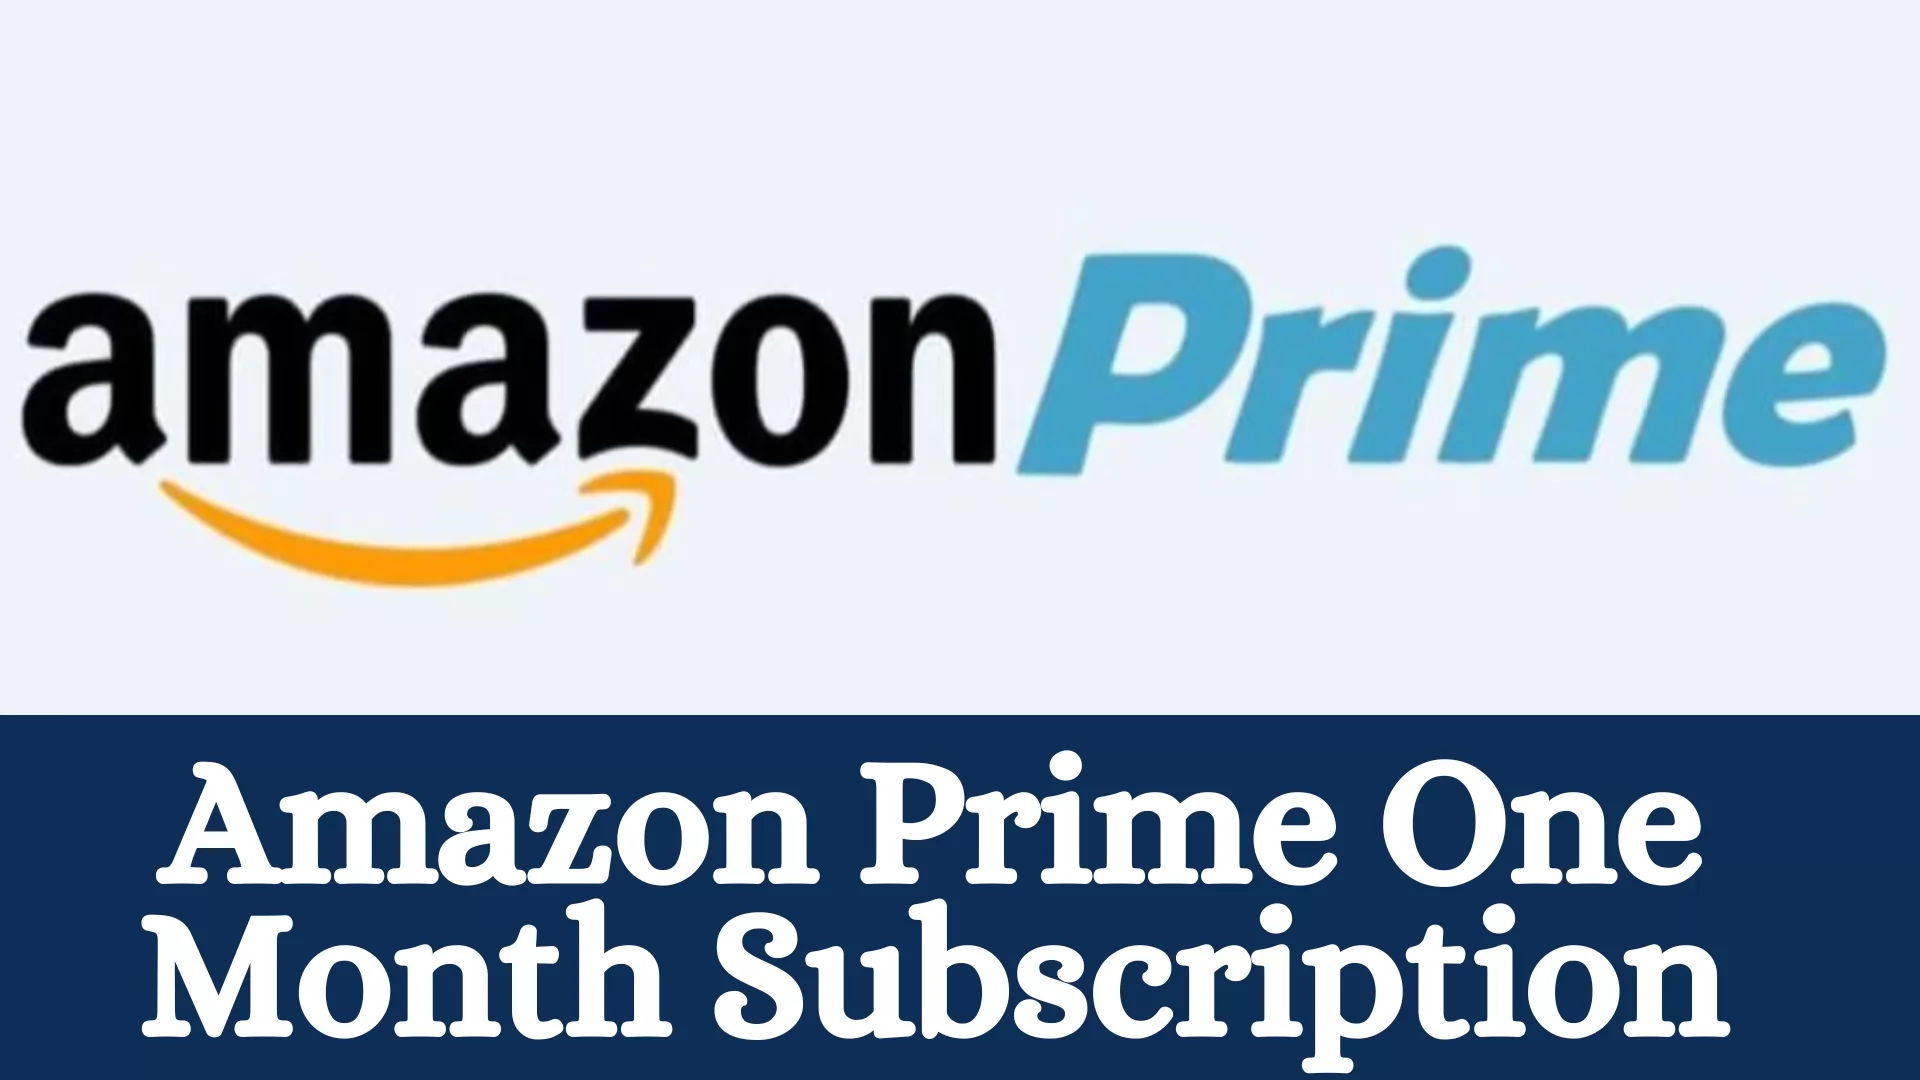 Amazon Prime One Month Subscription